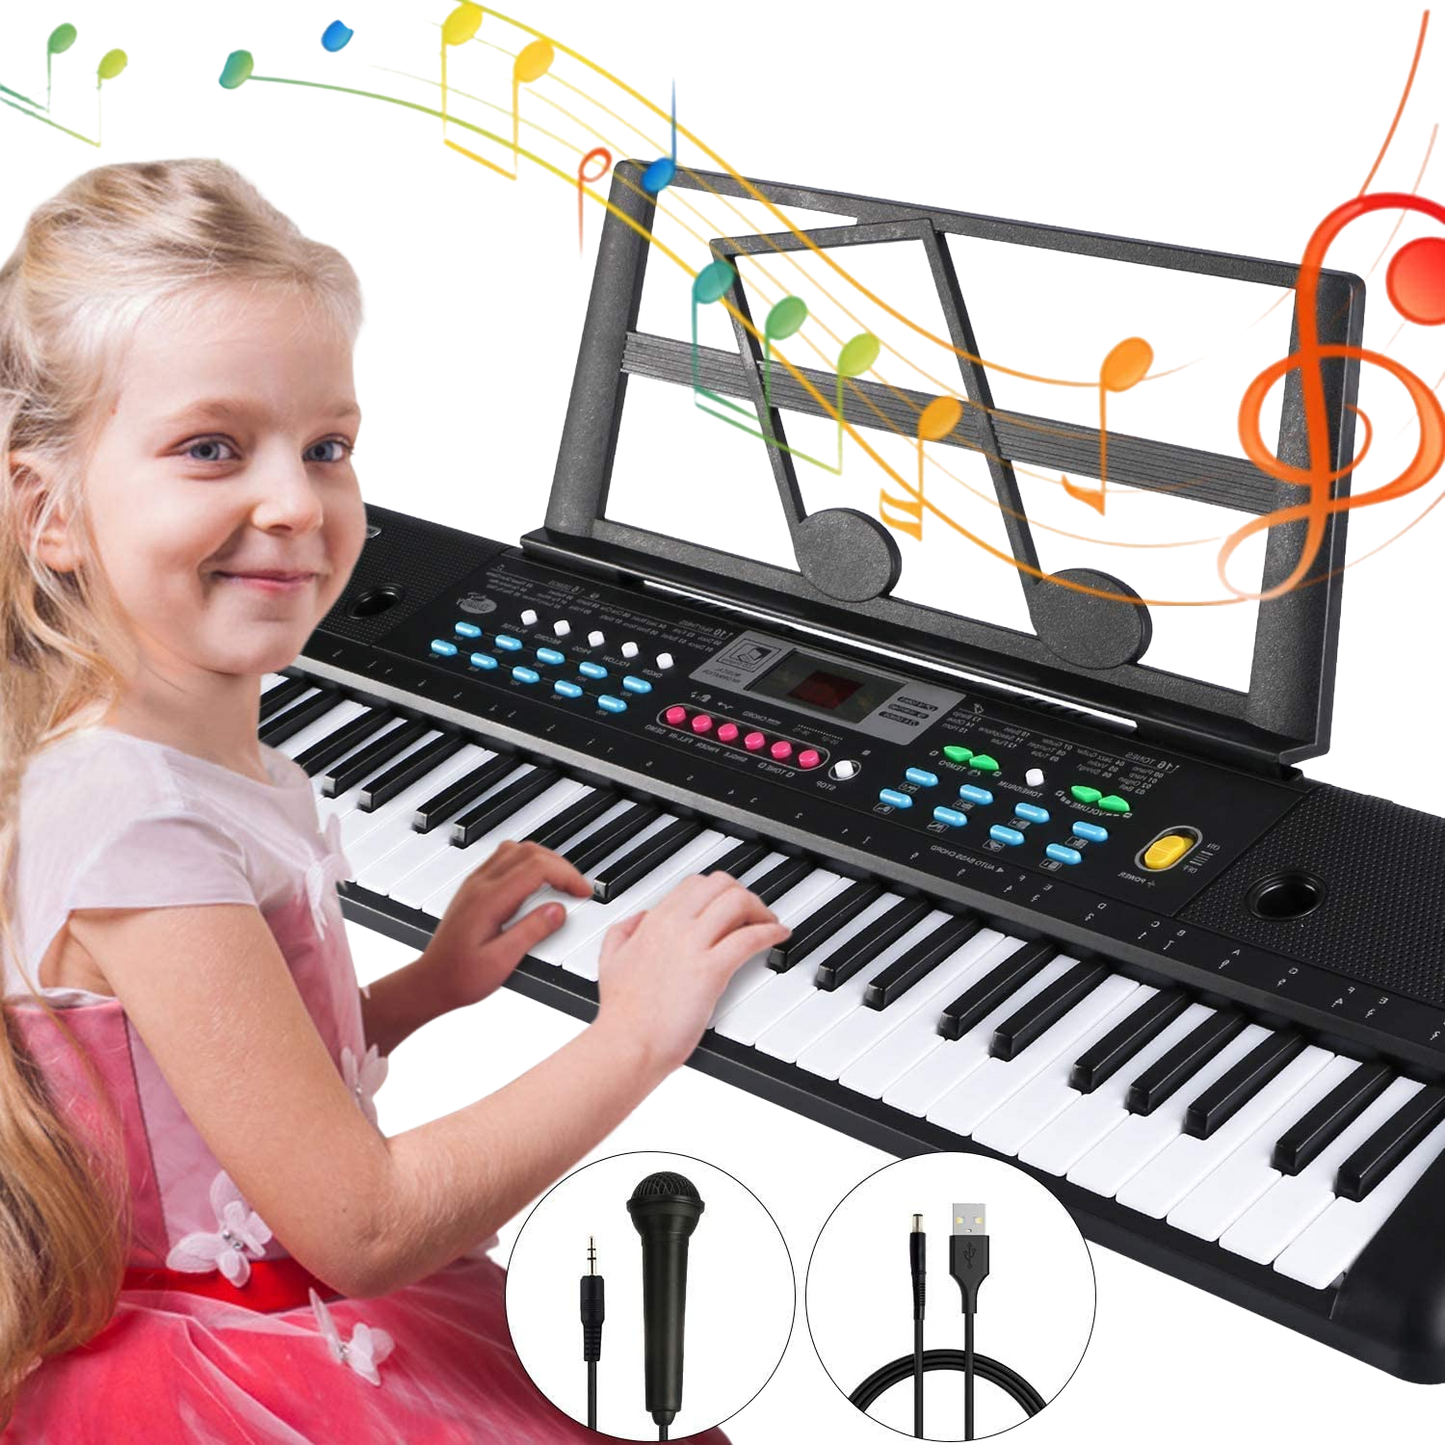 Tencoz Electronic Keyboard Piano 61 Key, Portable Piano Keyboard with Music Stand, Microphone, Power Supply Digital Music Piano Keyboard for Kids - Home Decor Gifts and More